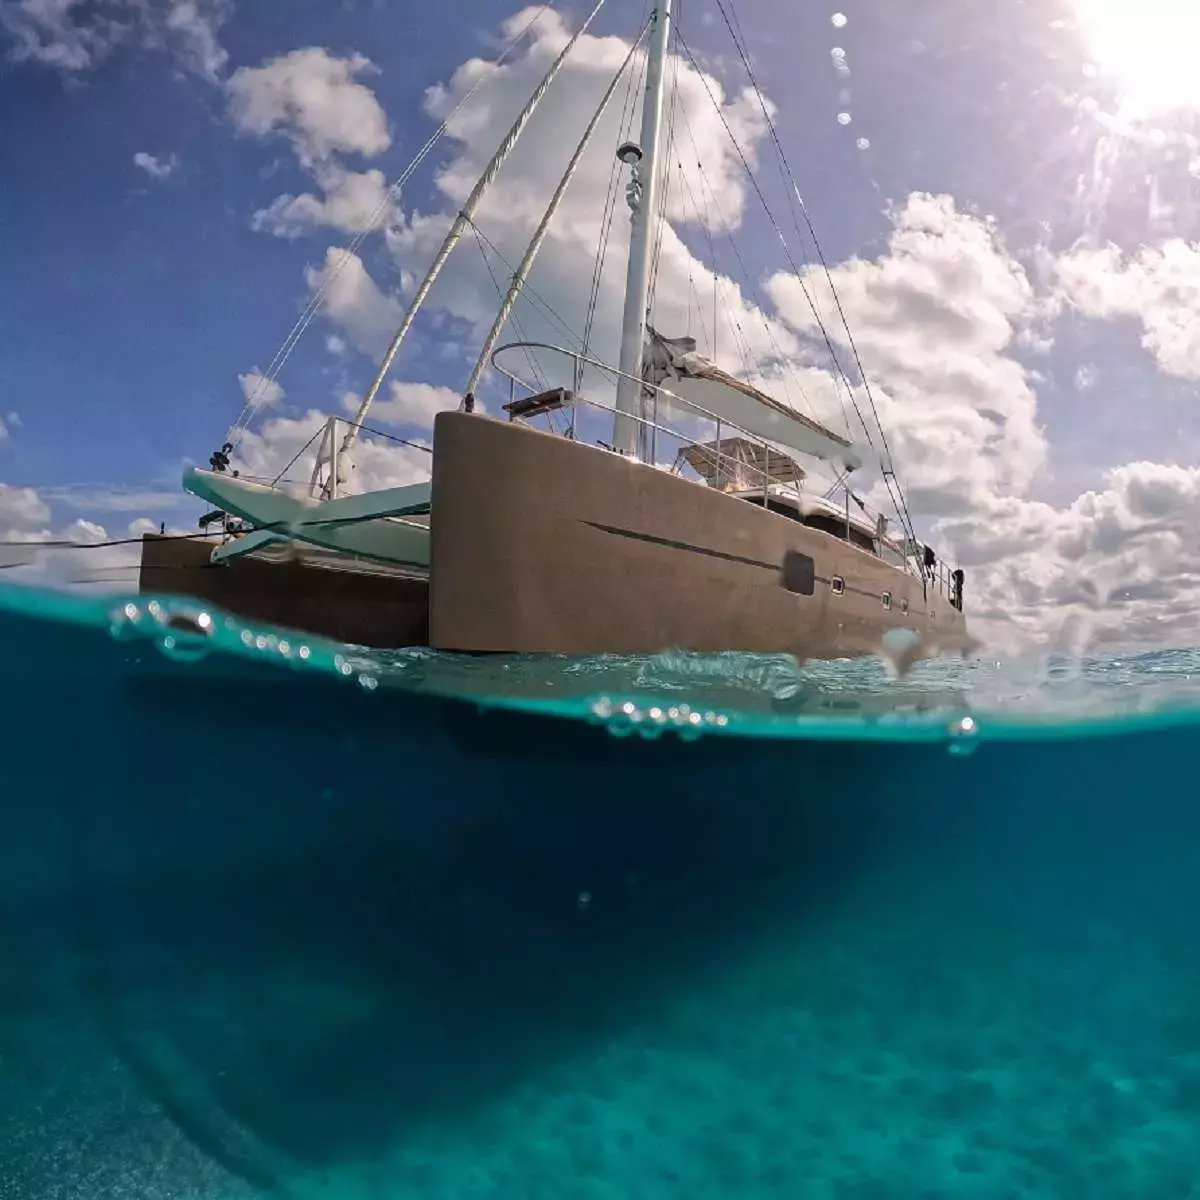 Serendipity by Sunreef Yachts - Top rates for a Charter of a private Sailing Catamaran in Bahamas